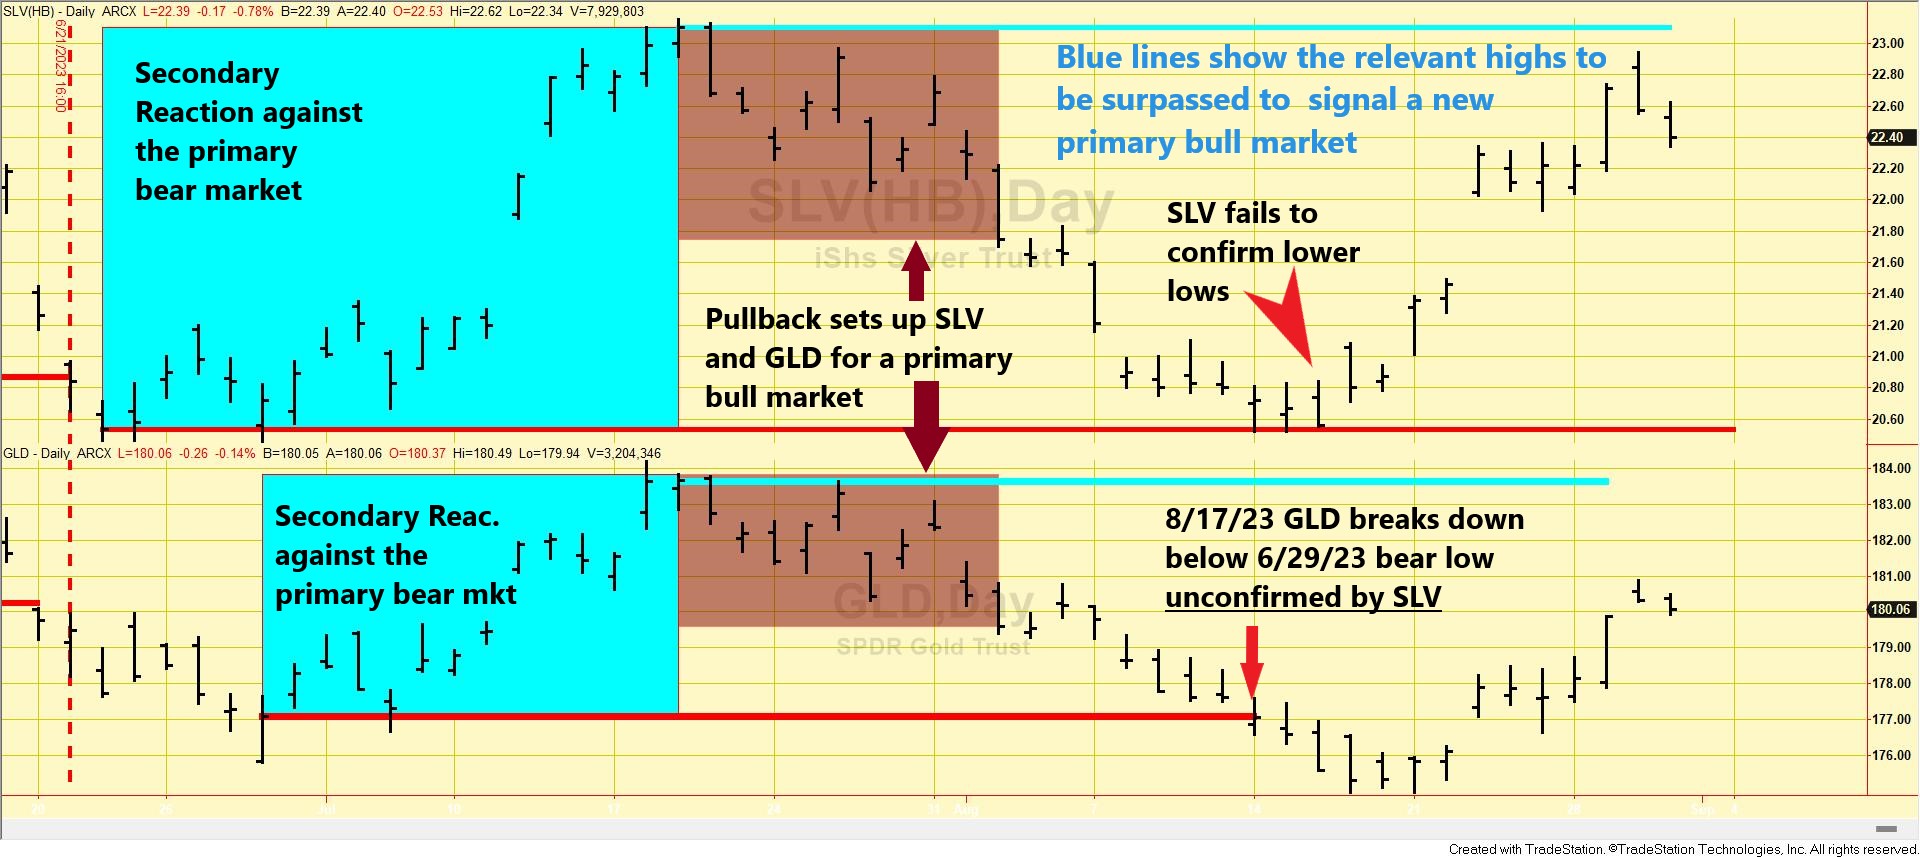 Dow Theory Update for August 31: Gold and Silver may trigger a new primary bull market soon